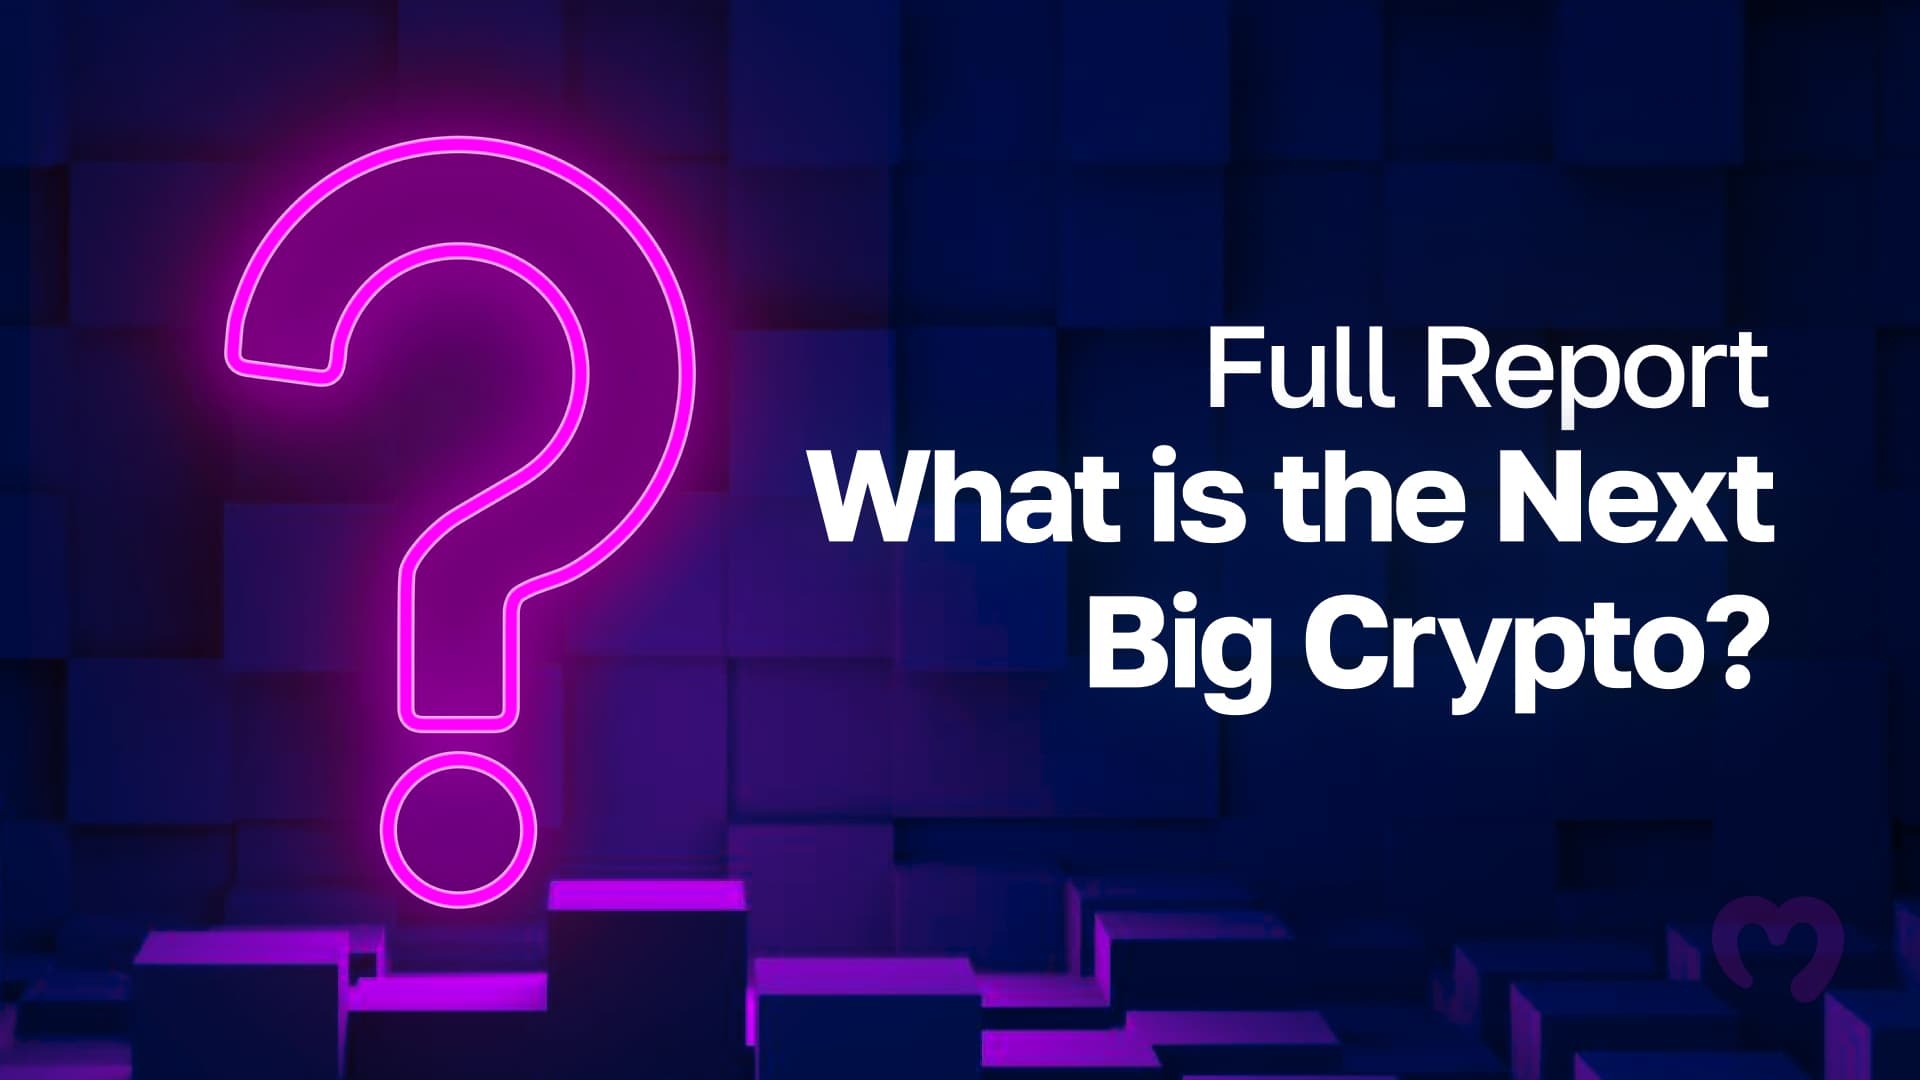 Full Report: What is the Next Big Crypto?